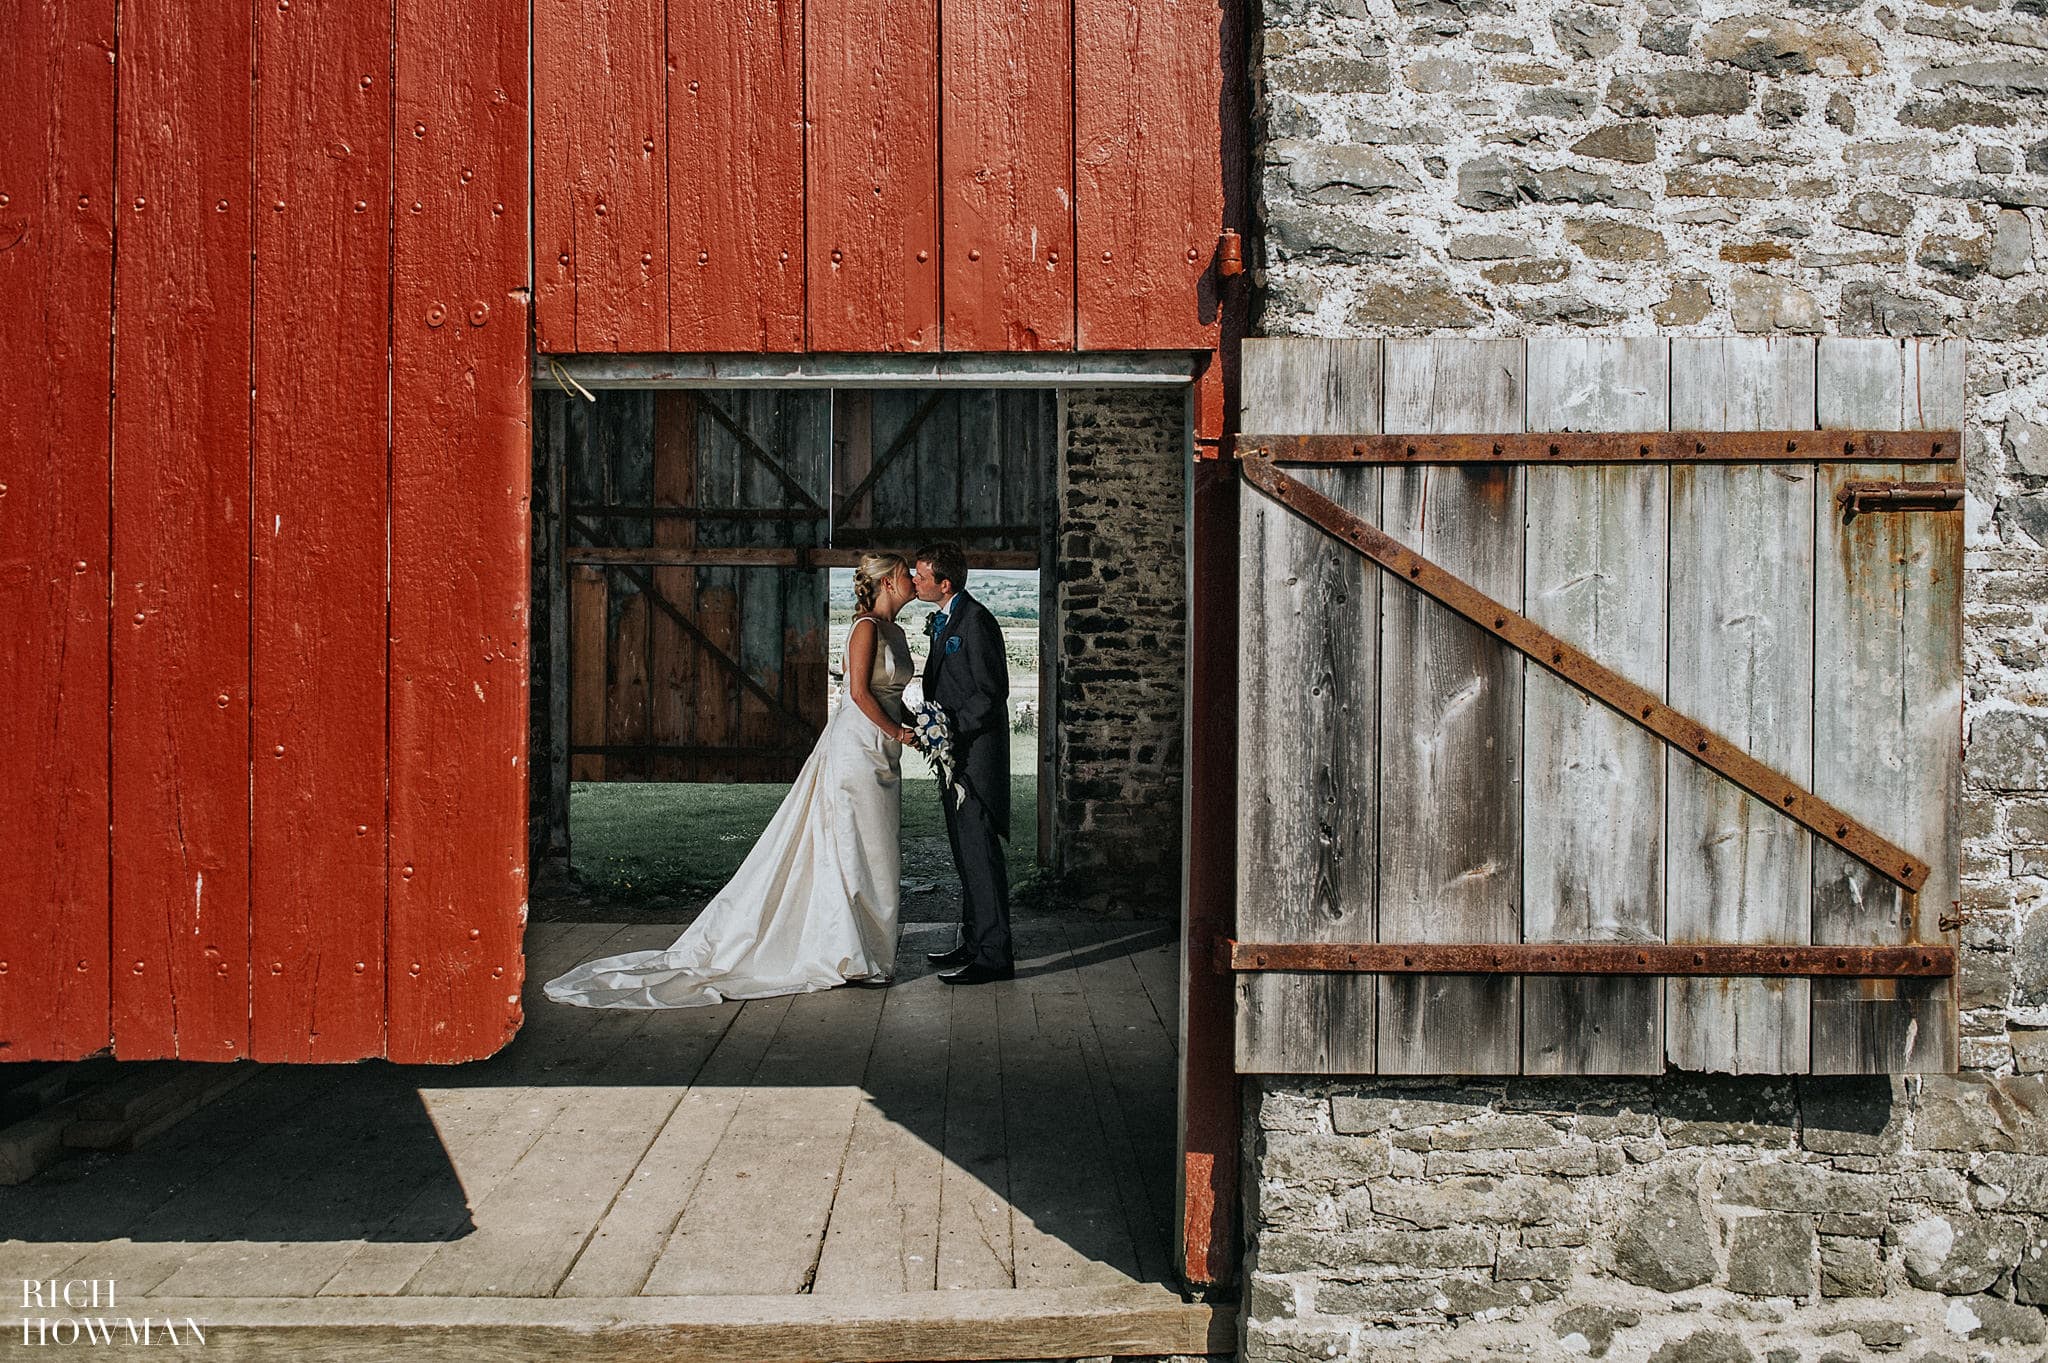 Llanerchaeron wedding. The bride and groom photographed in the barn by Rich Howman wedding photographer